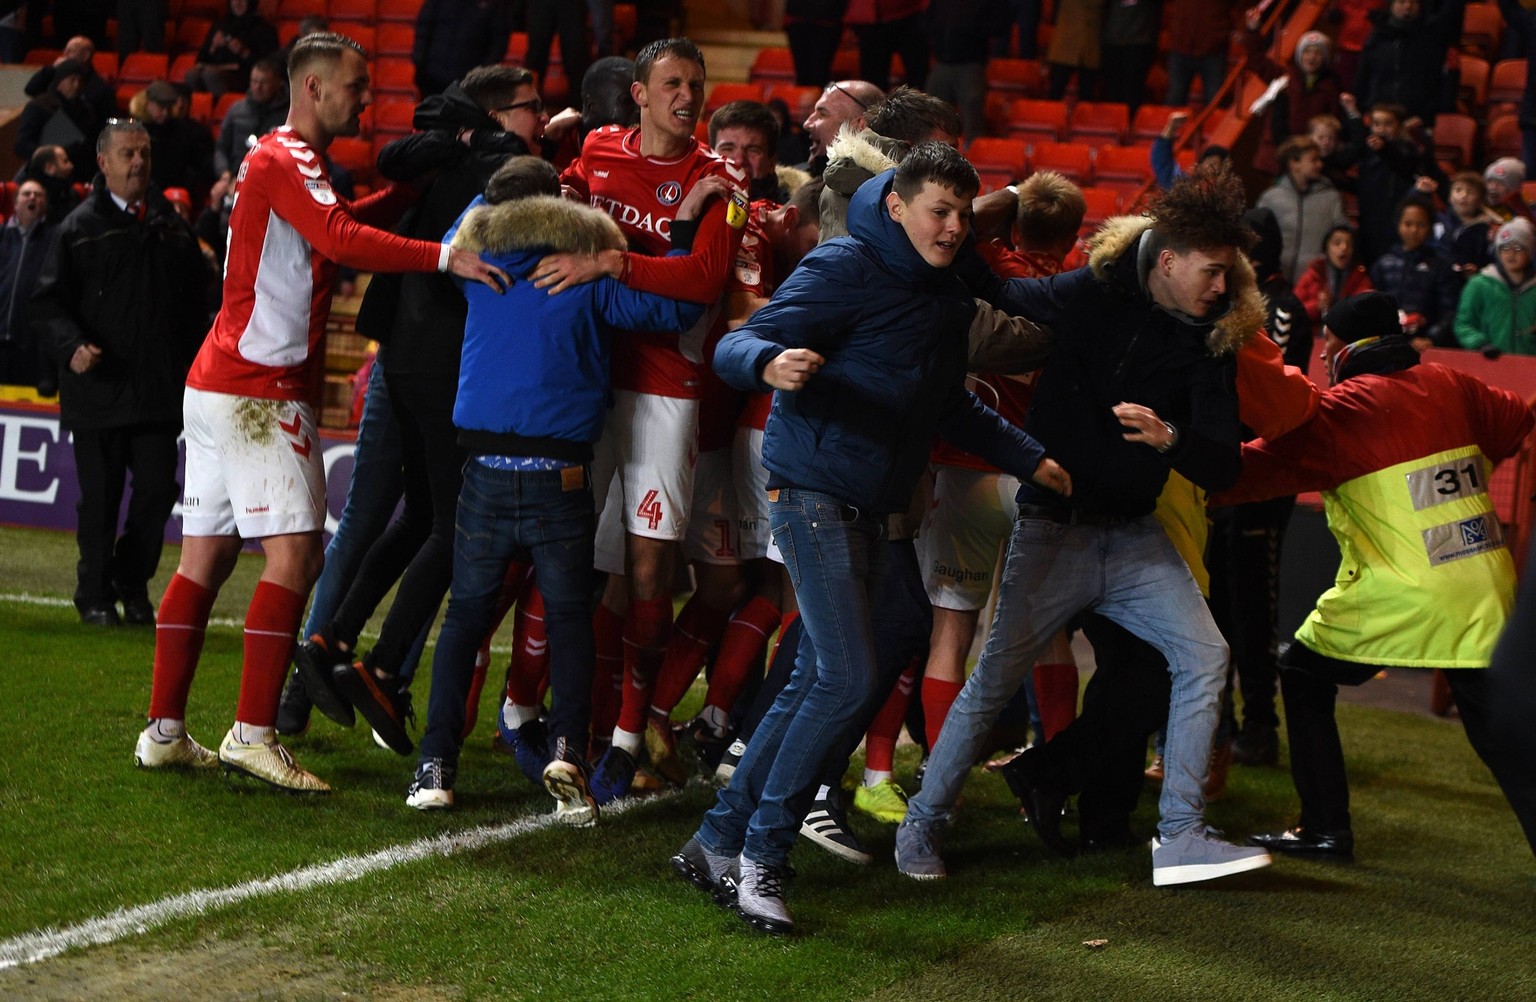 Charlton Athletic v Accrington Stanley - Sky Bet League One - The Valley Charlton Athletic players and fans celebrate their late winner EDITORIAL USE ONLY No use with unauthorised audio, video, data,  ...